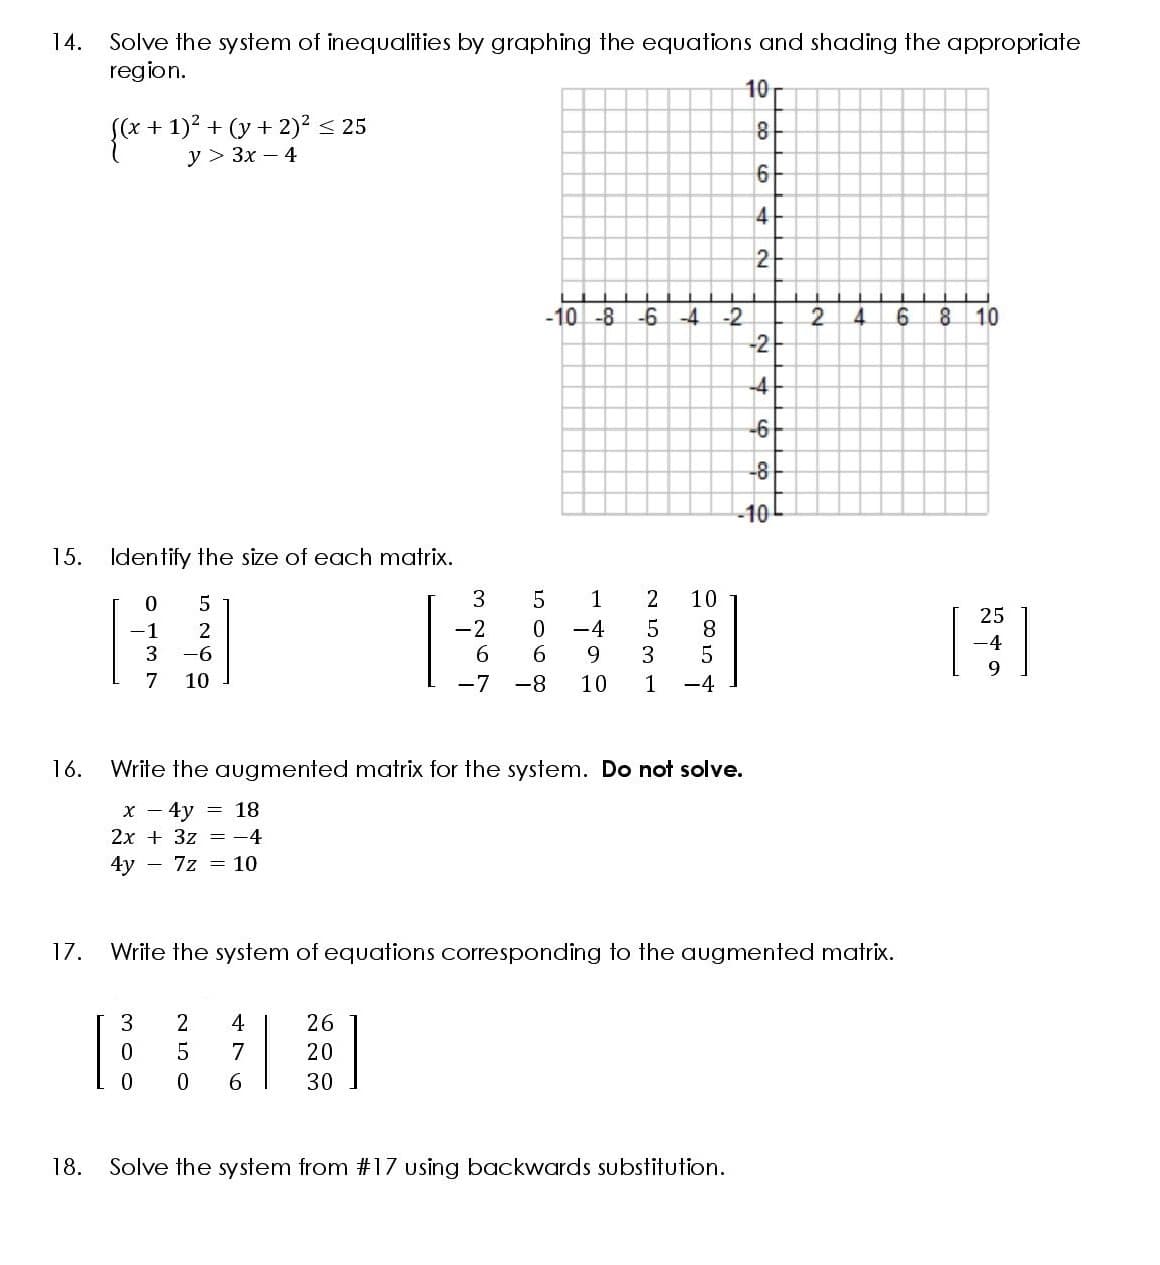 14.
Solve the system of inequalities by graphing the equations and shading the appropriate
region.
10r
e + "> 3x - 4
(x+1)2 + (y+ 2)2 < 25
У > Зх — 4
8
6
2
-10 -8 -6 -4
8 10
-2
2.
-21
4.
-4
-6
-8
-10
15. Identify the size of each matrix.
1
2
10
25
-1
2
-2
-4
5
8
-4
3
-6
9.
3
7
10
-7 -8
10
1
-4
16.
Write the augmented matrix for the system. Do not solve.
x - 4y
= 18
2x + 3z = -4
4y - 7z = 10
17.
Write the system of equations corresponding to the augmented matrix.
2
4
26
7
20
6.
30
18.
Solve the system from #17 using backwards substitution.
N LO O
